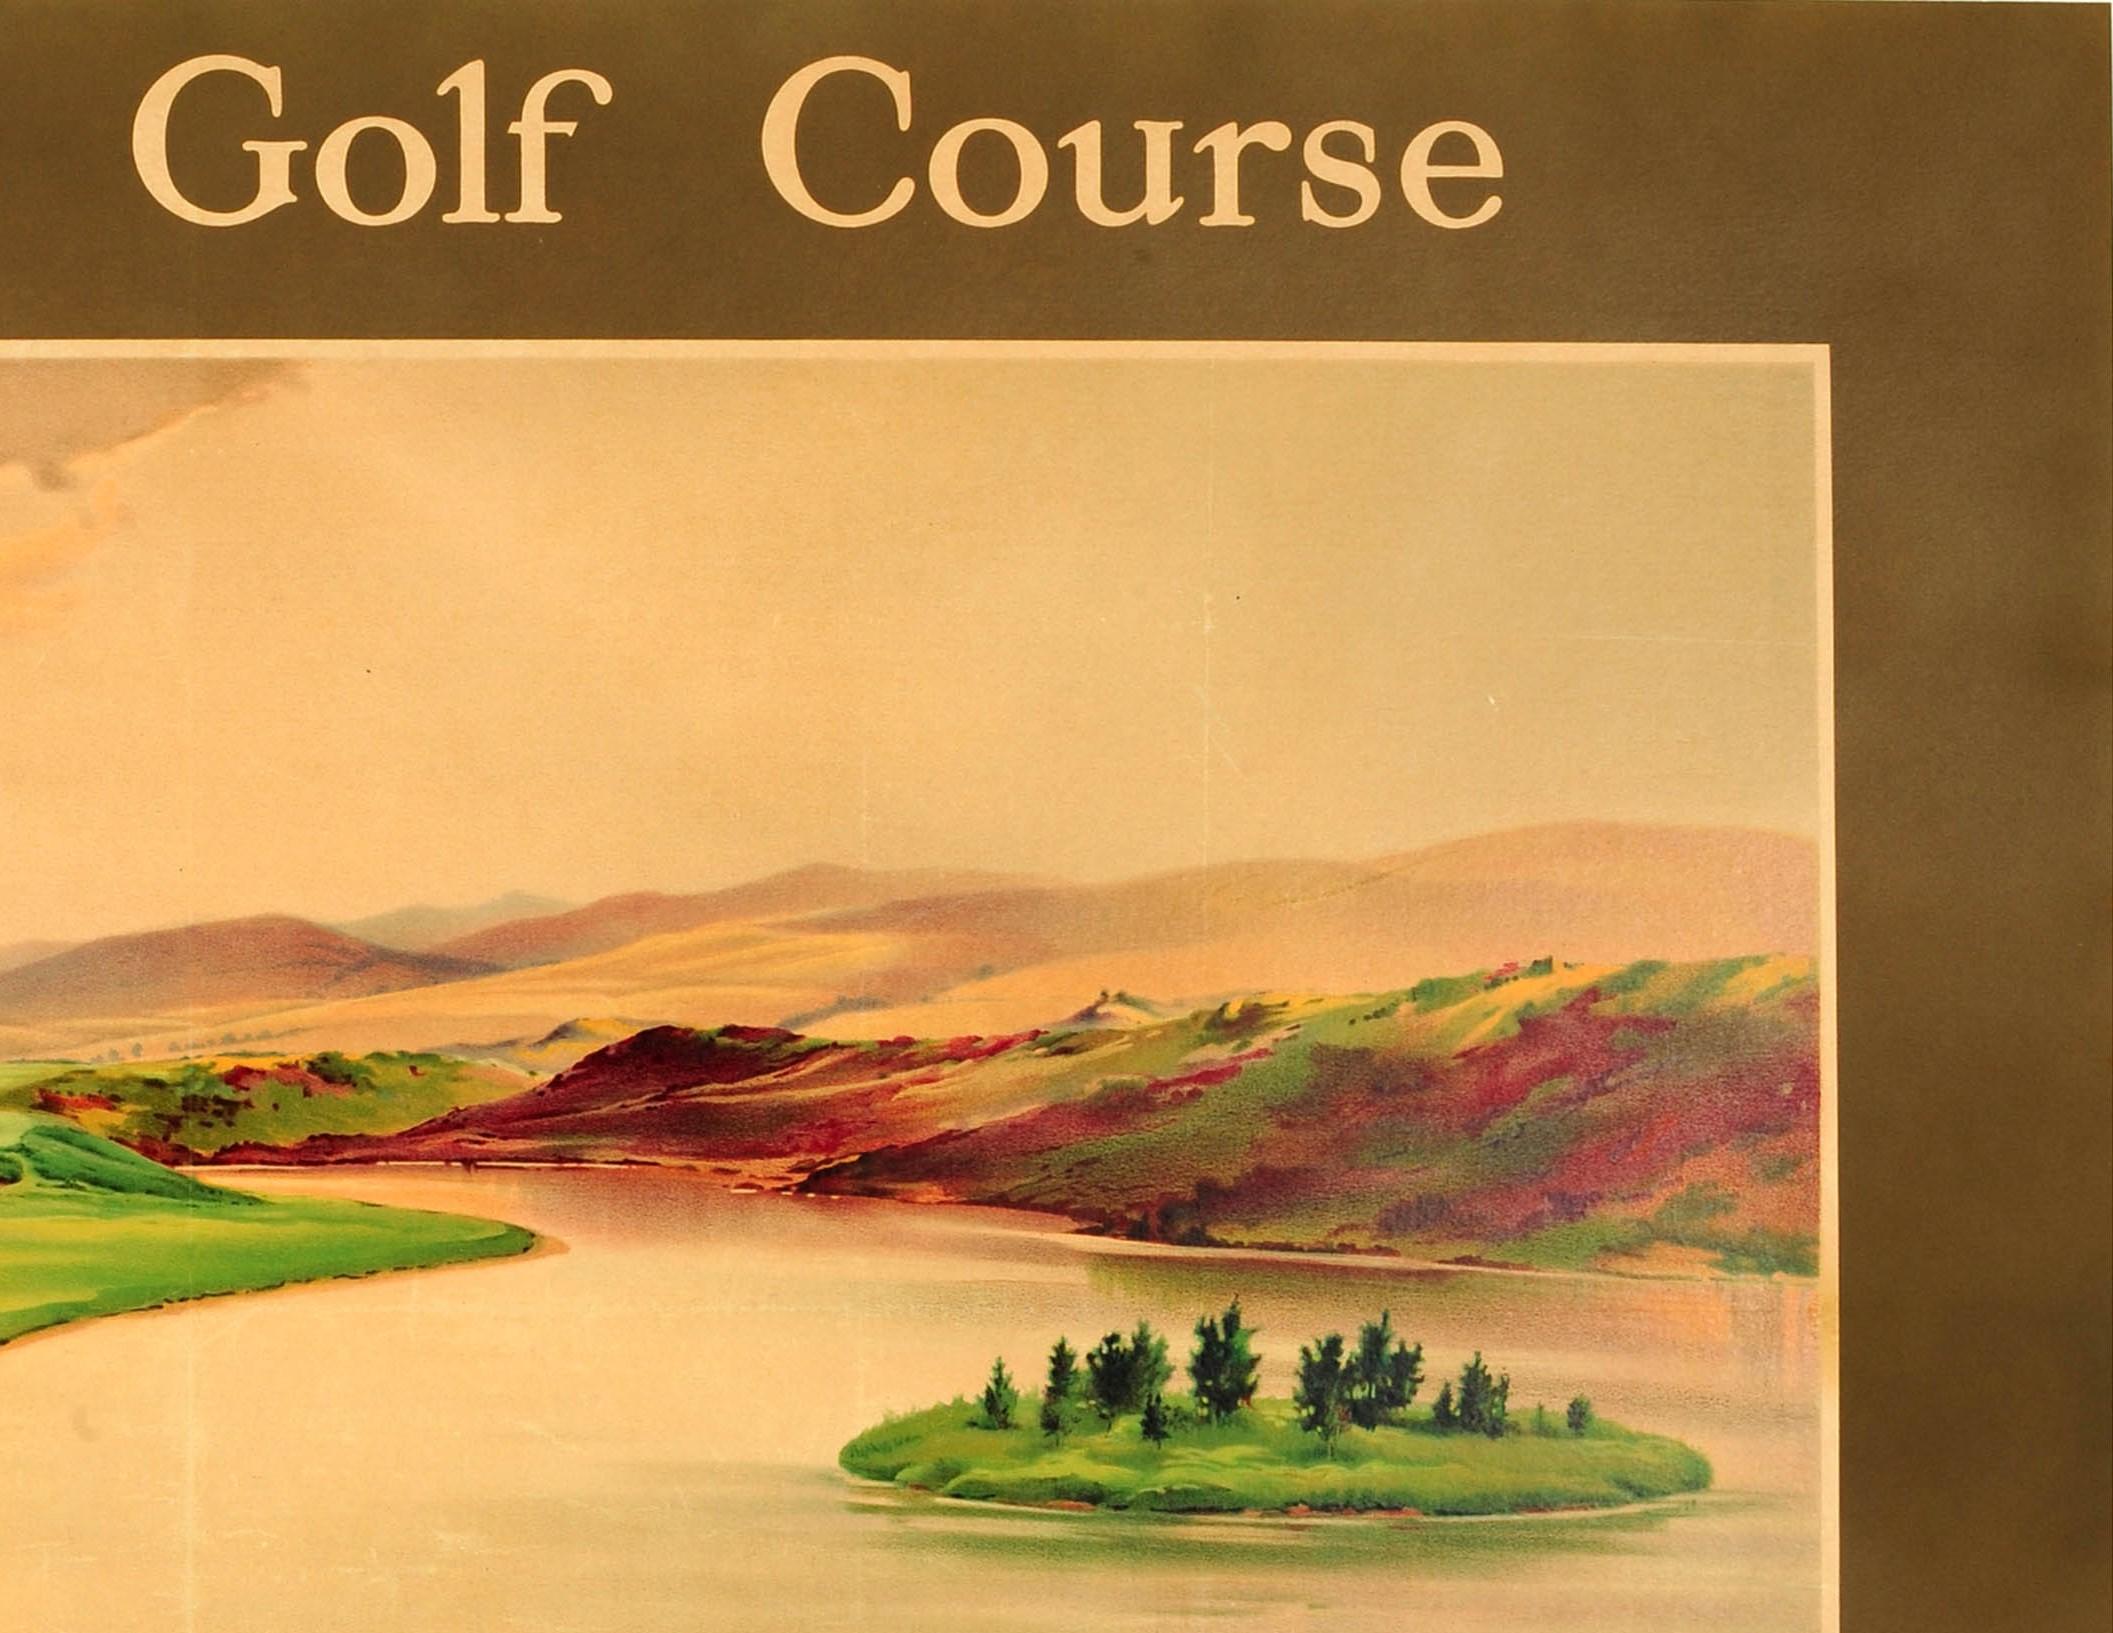 British Large Original Caledonian Railway Poster Gleneagles Golf Course Witches' Bowster